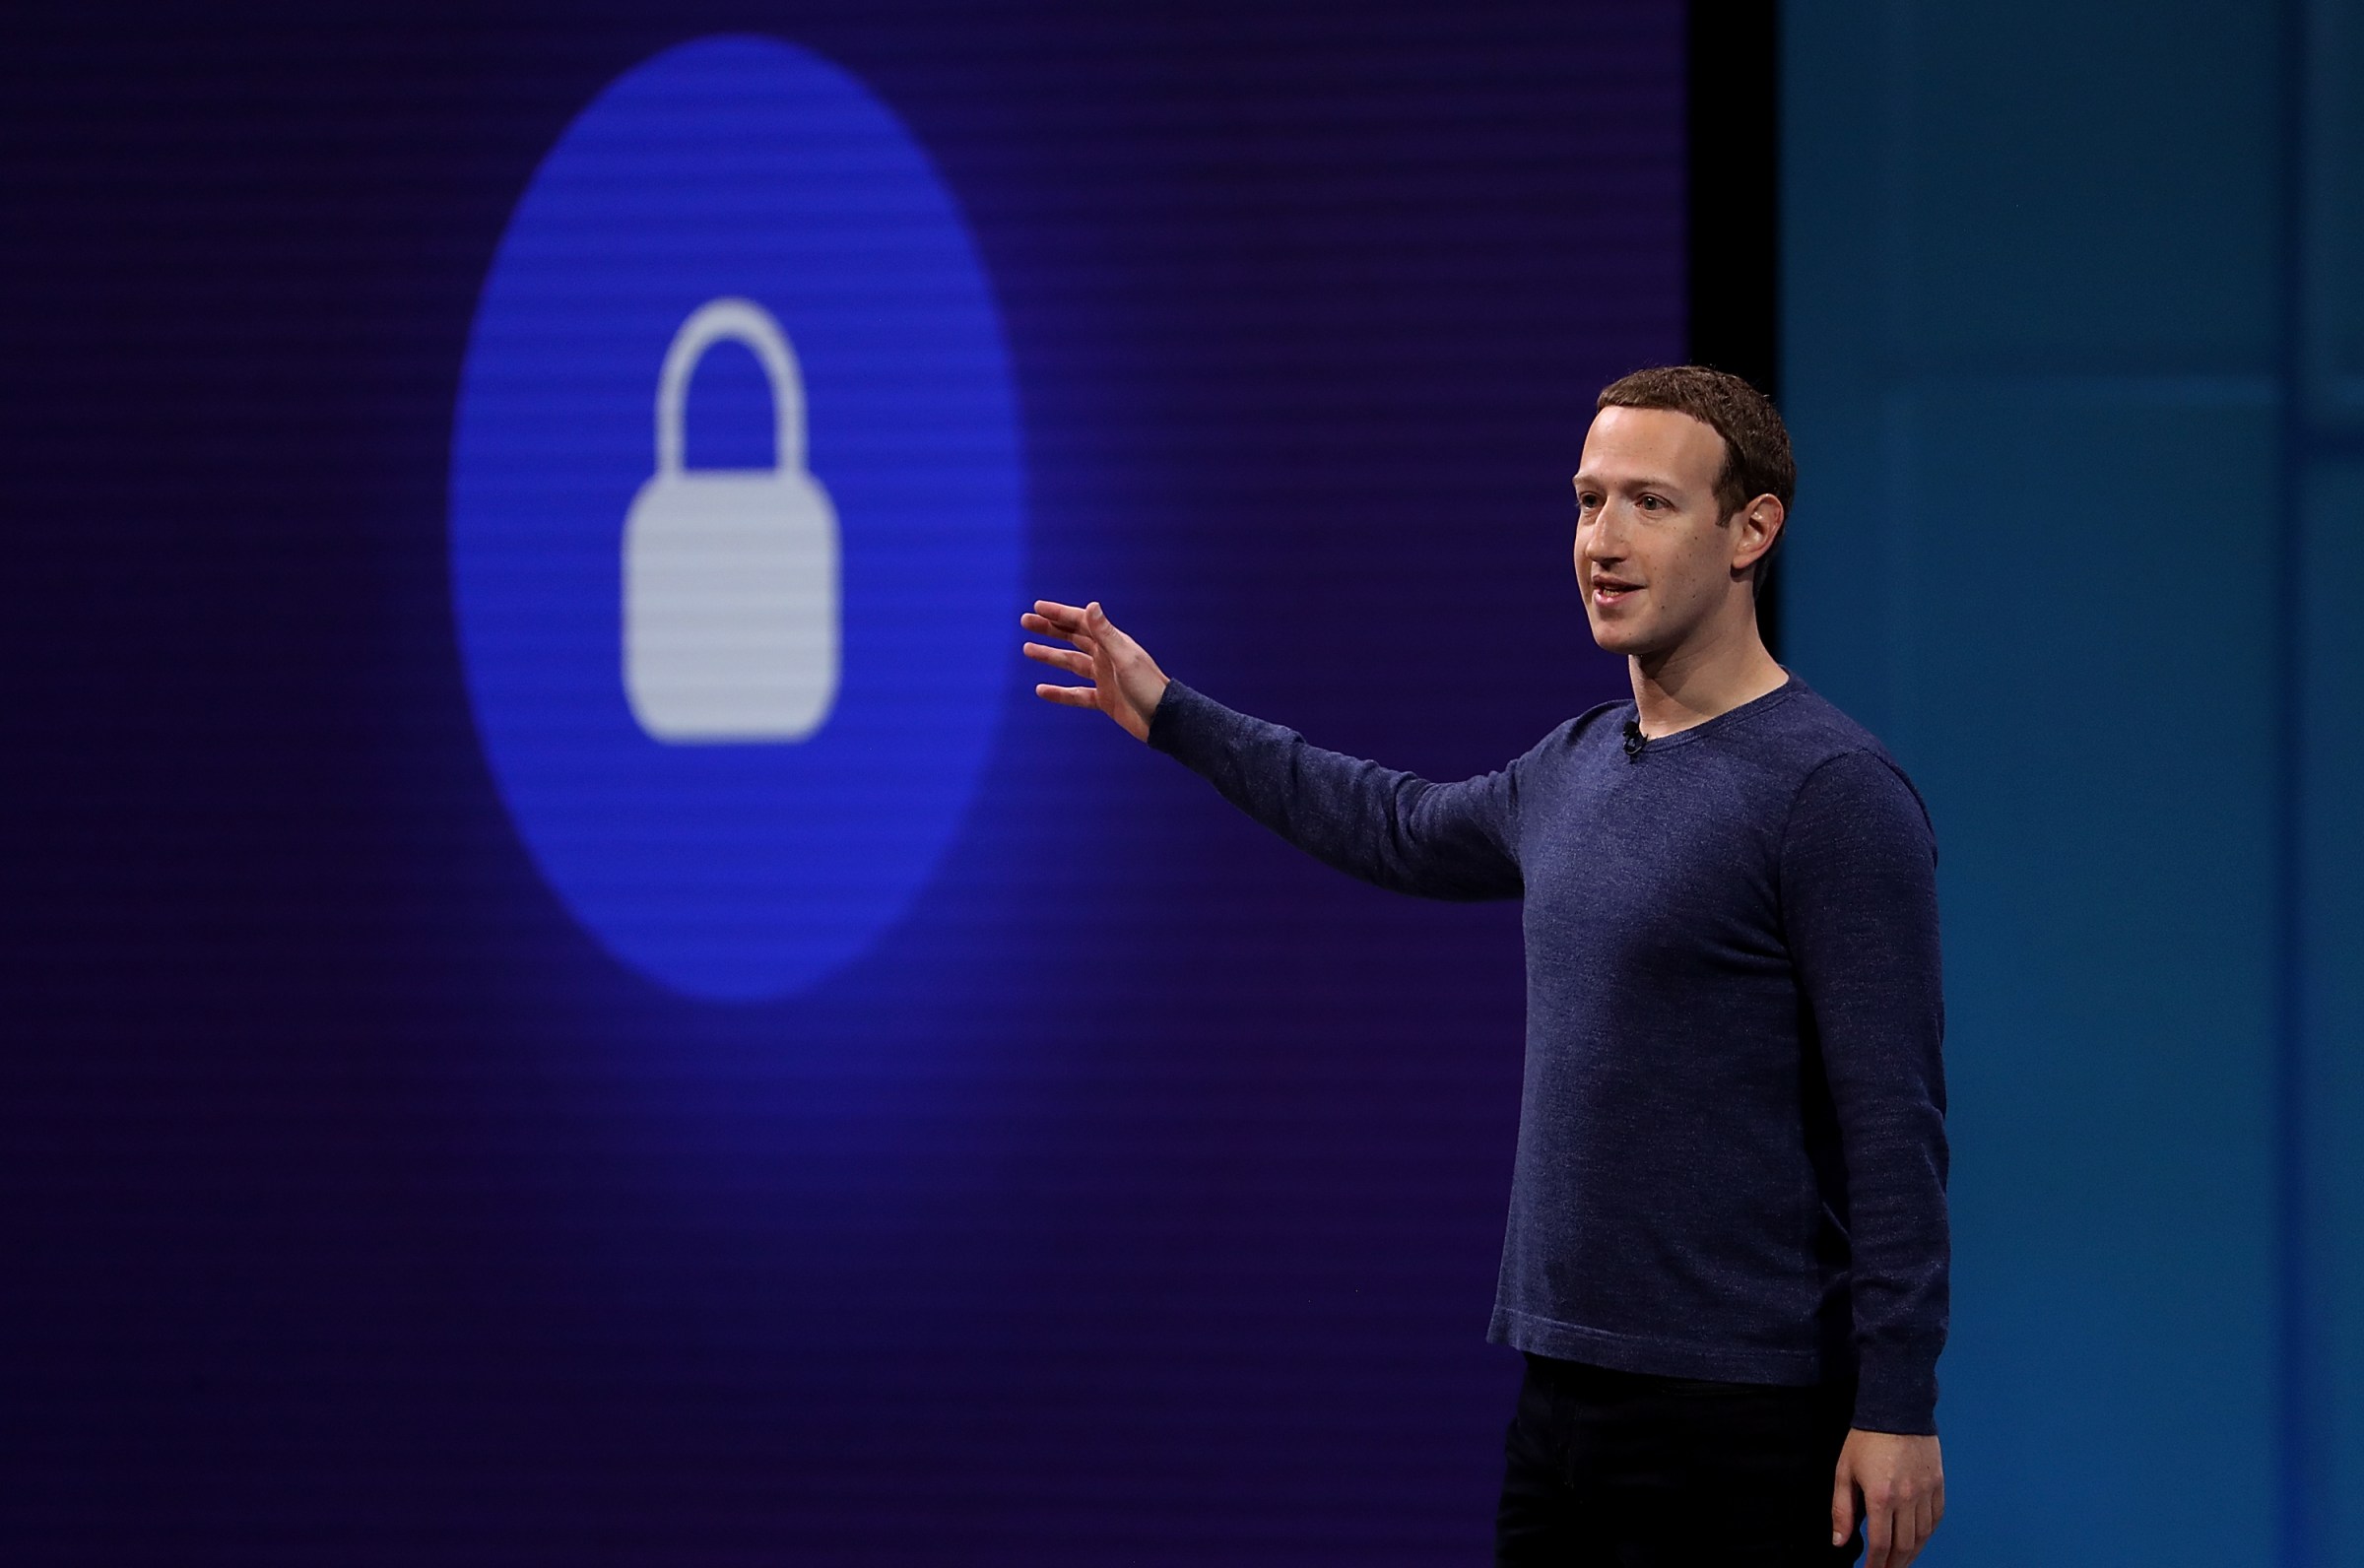 Facebook says it stored millions of Instagram passwords unencrypted on its servers